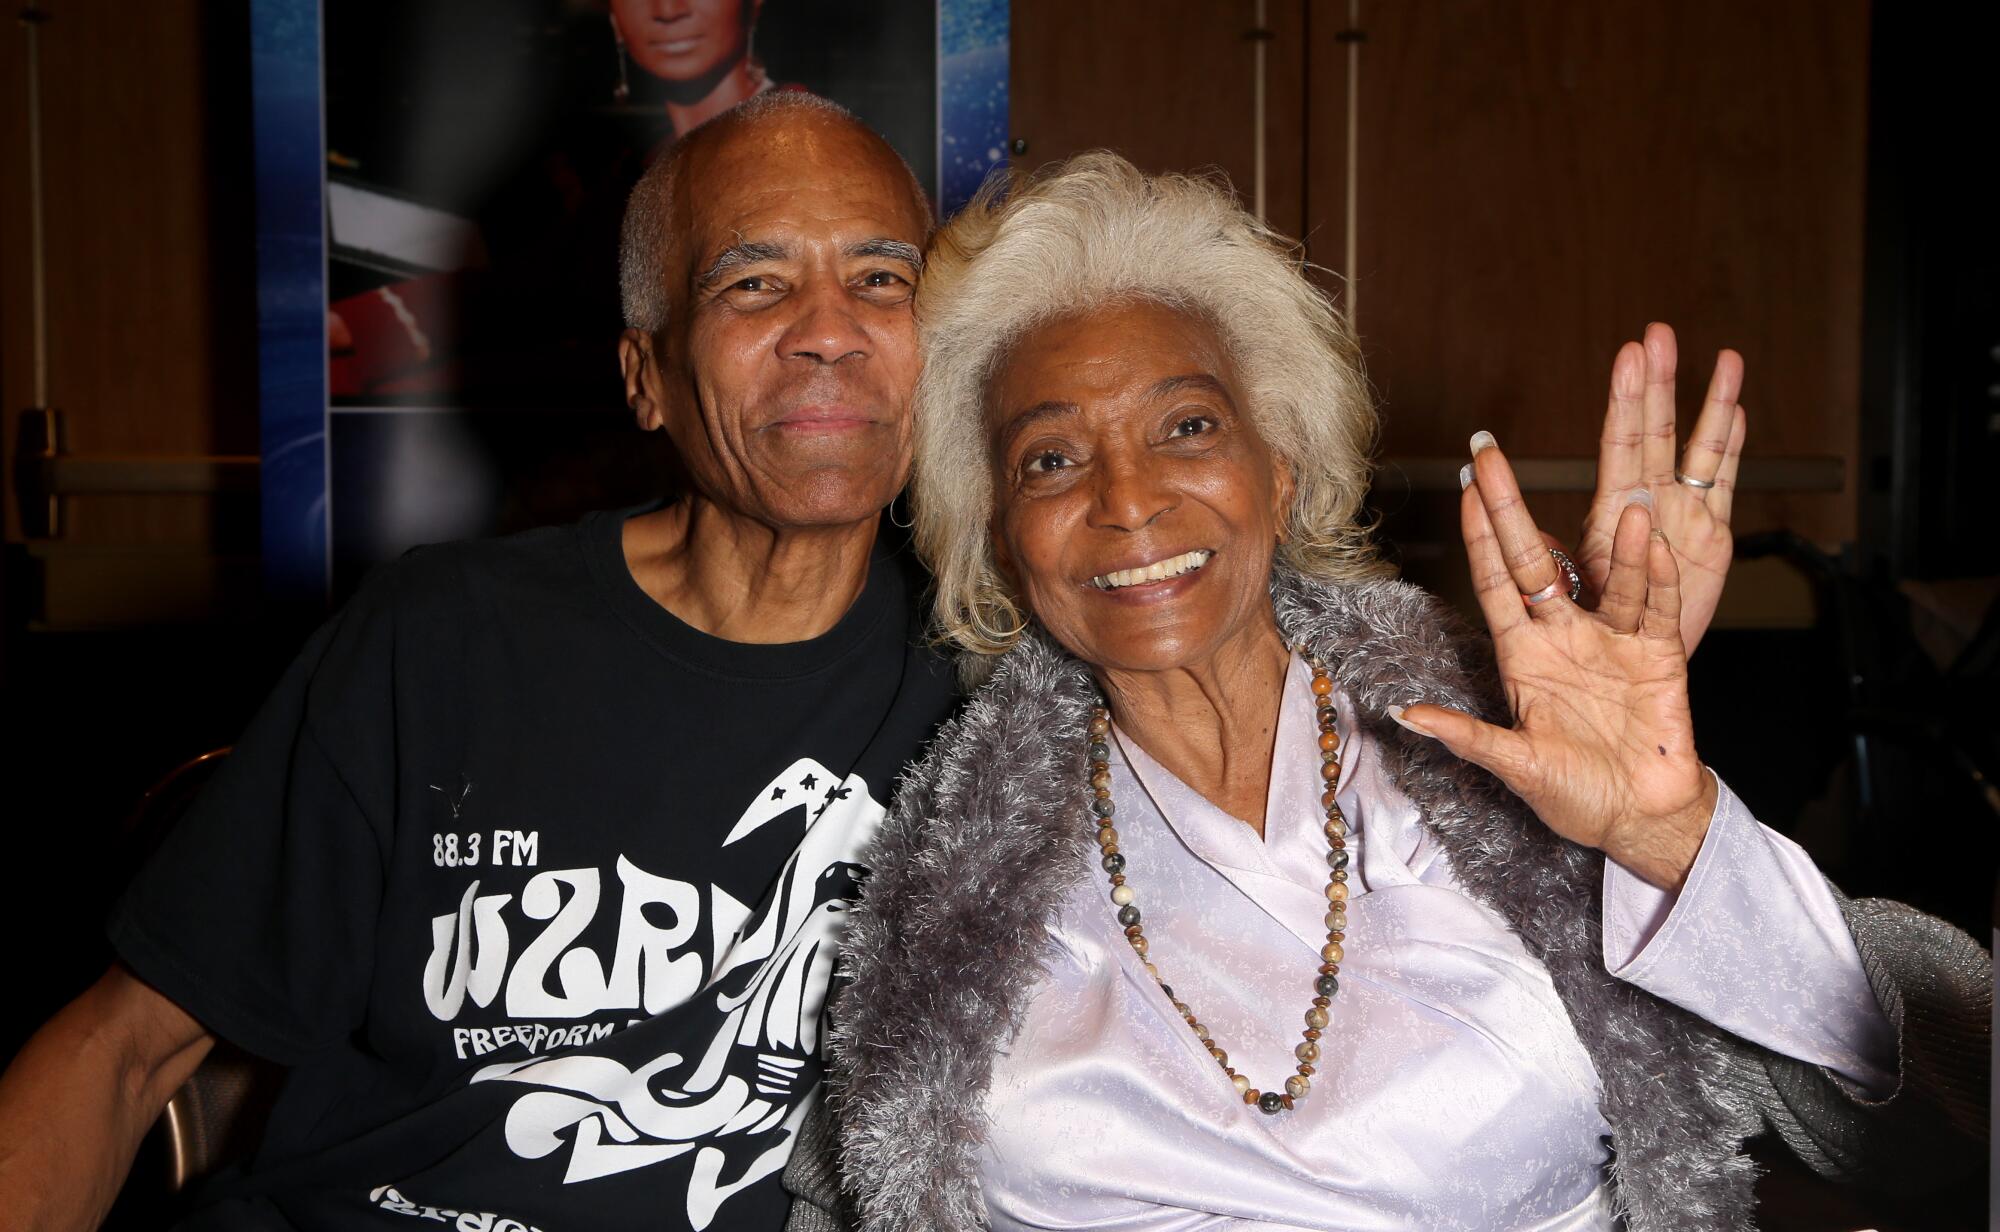 A middle-aged man, left, smiling with his older mother, who is spreading her hand in a "Star Trek" symbol. 